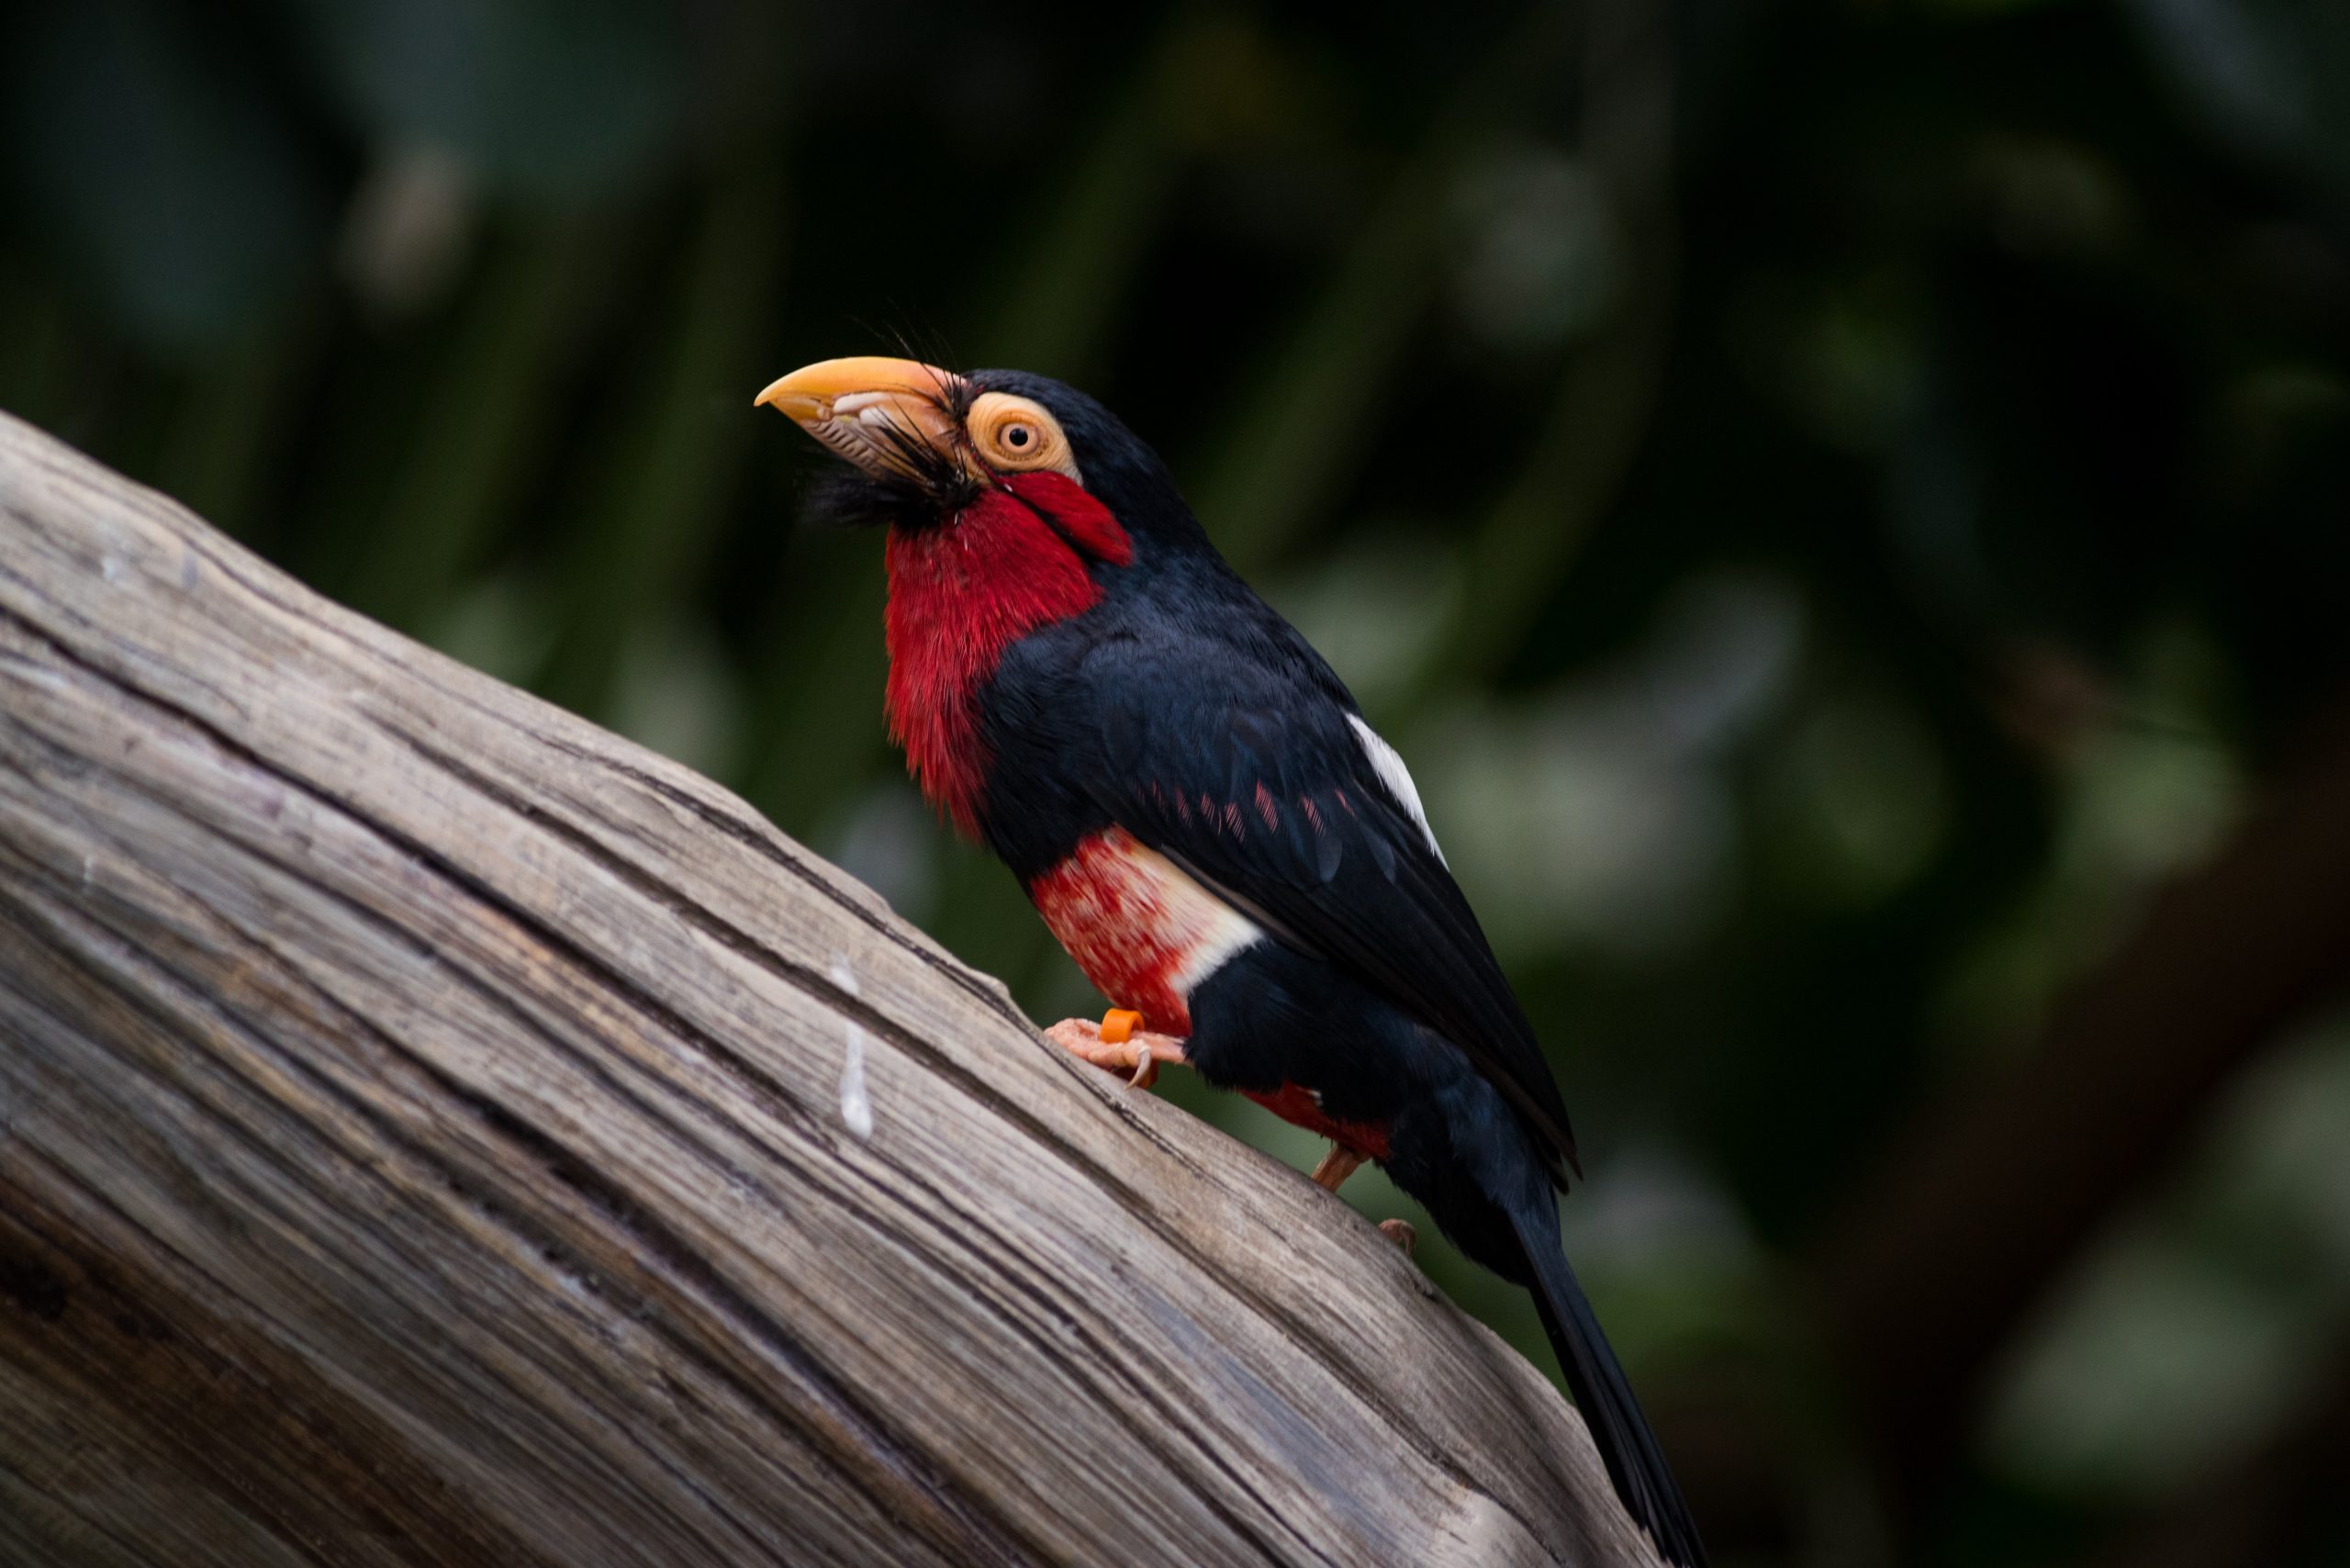 A Bearded Barbet perched on a branch